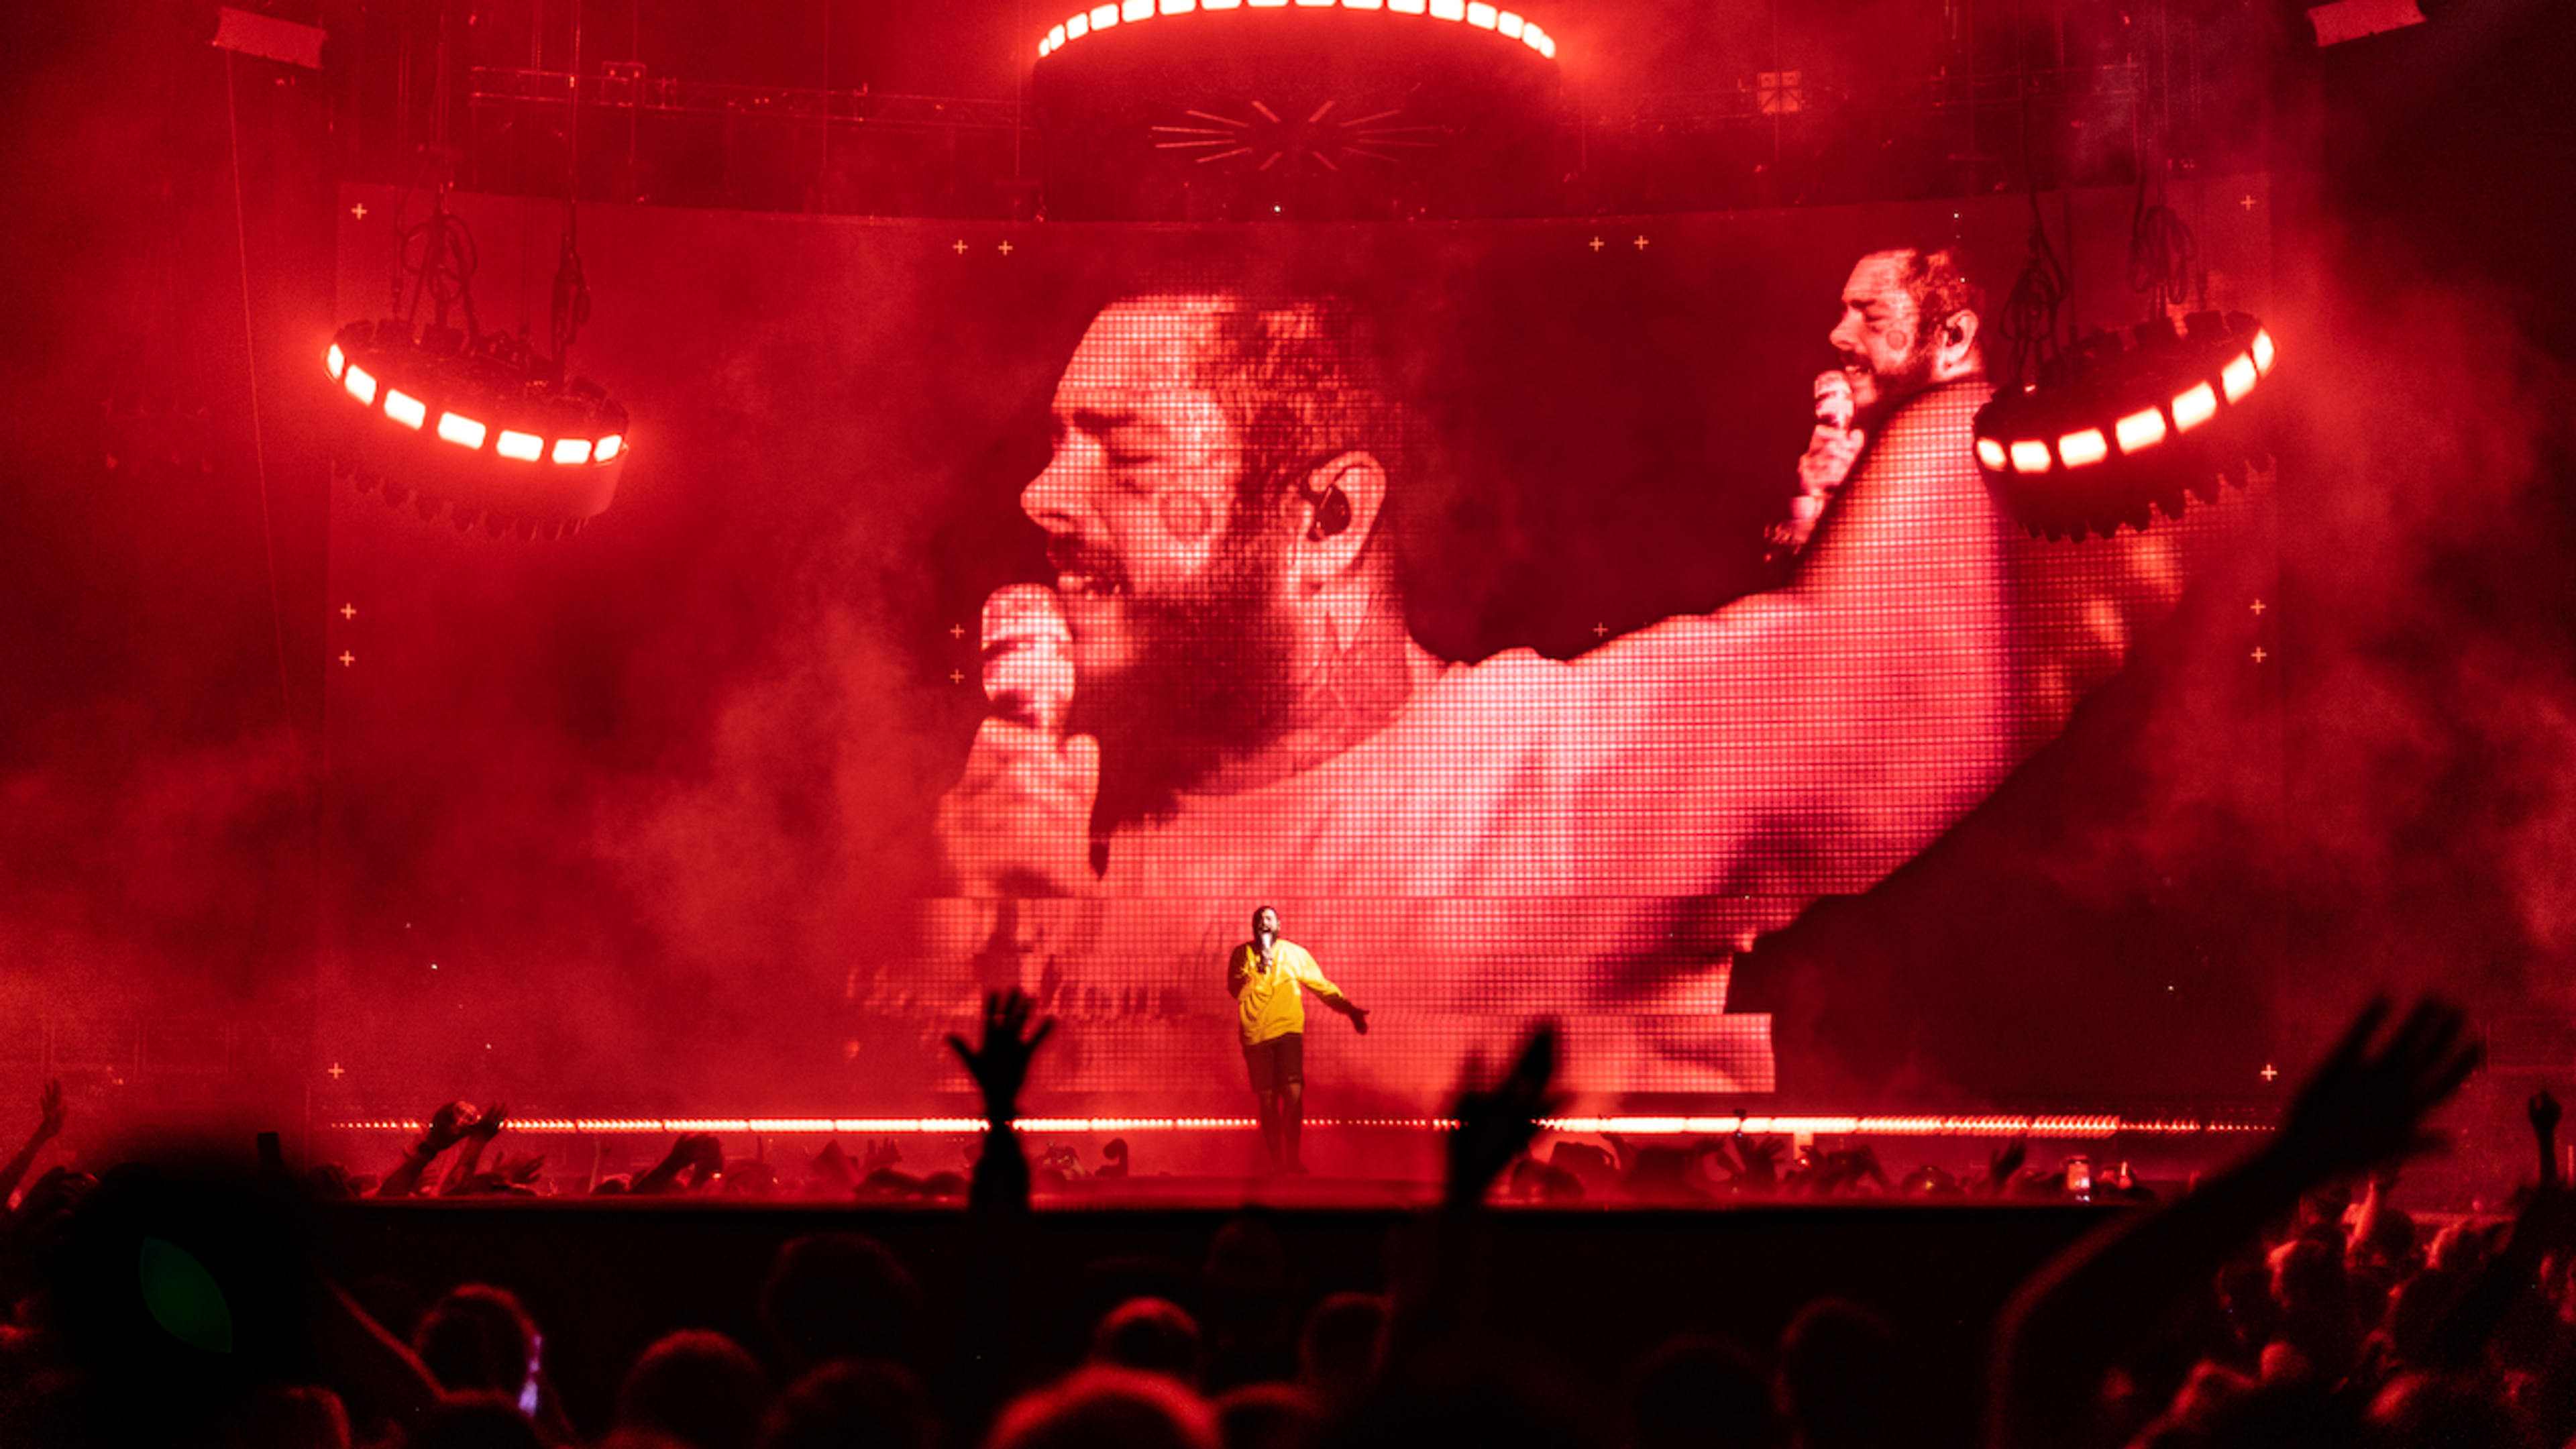 Post Malone performing on stage with yellow shirt with large LED screen lit up red behind him